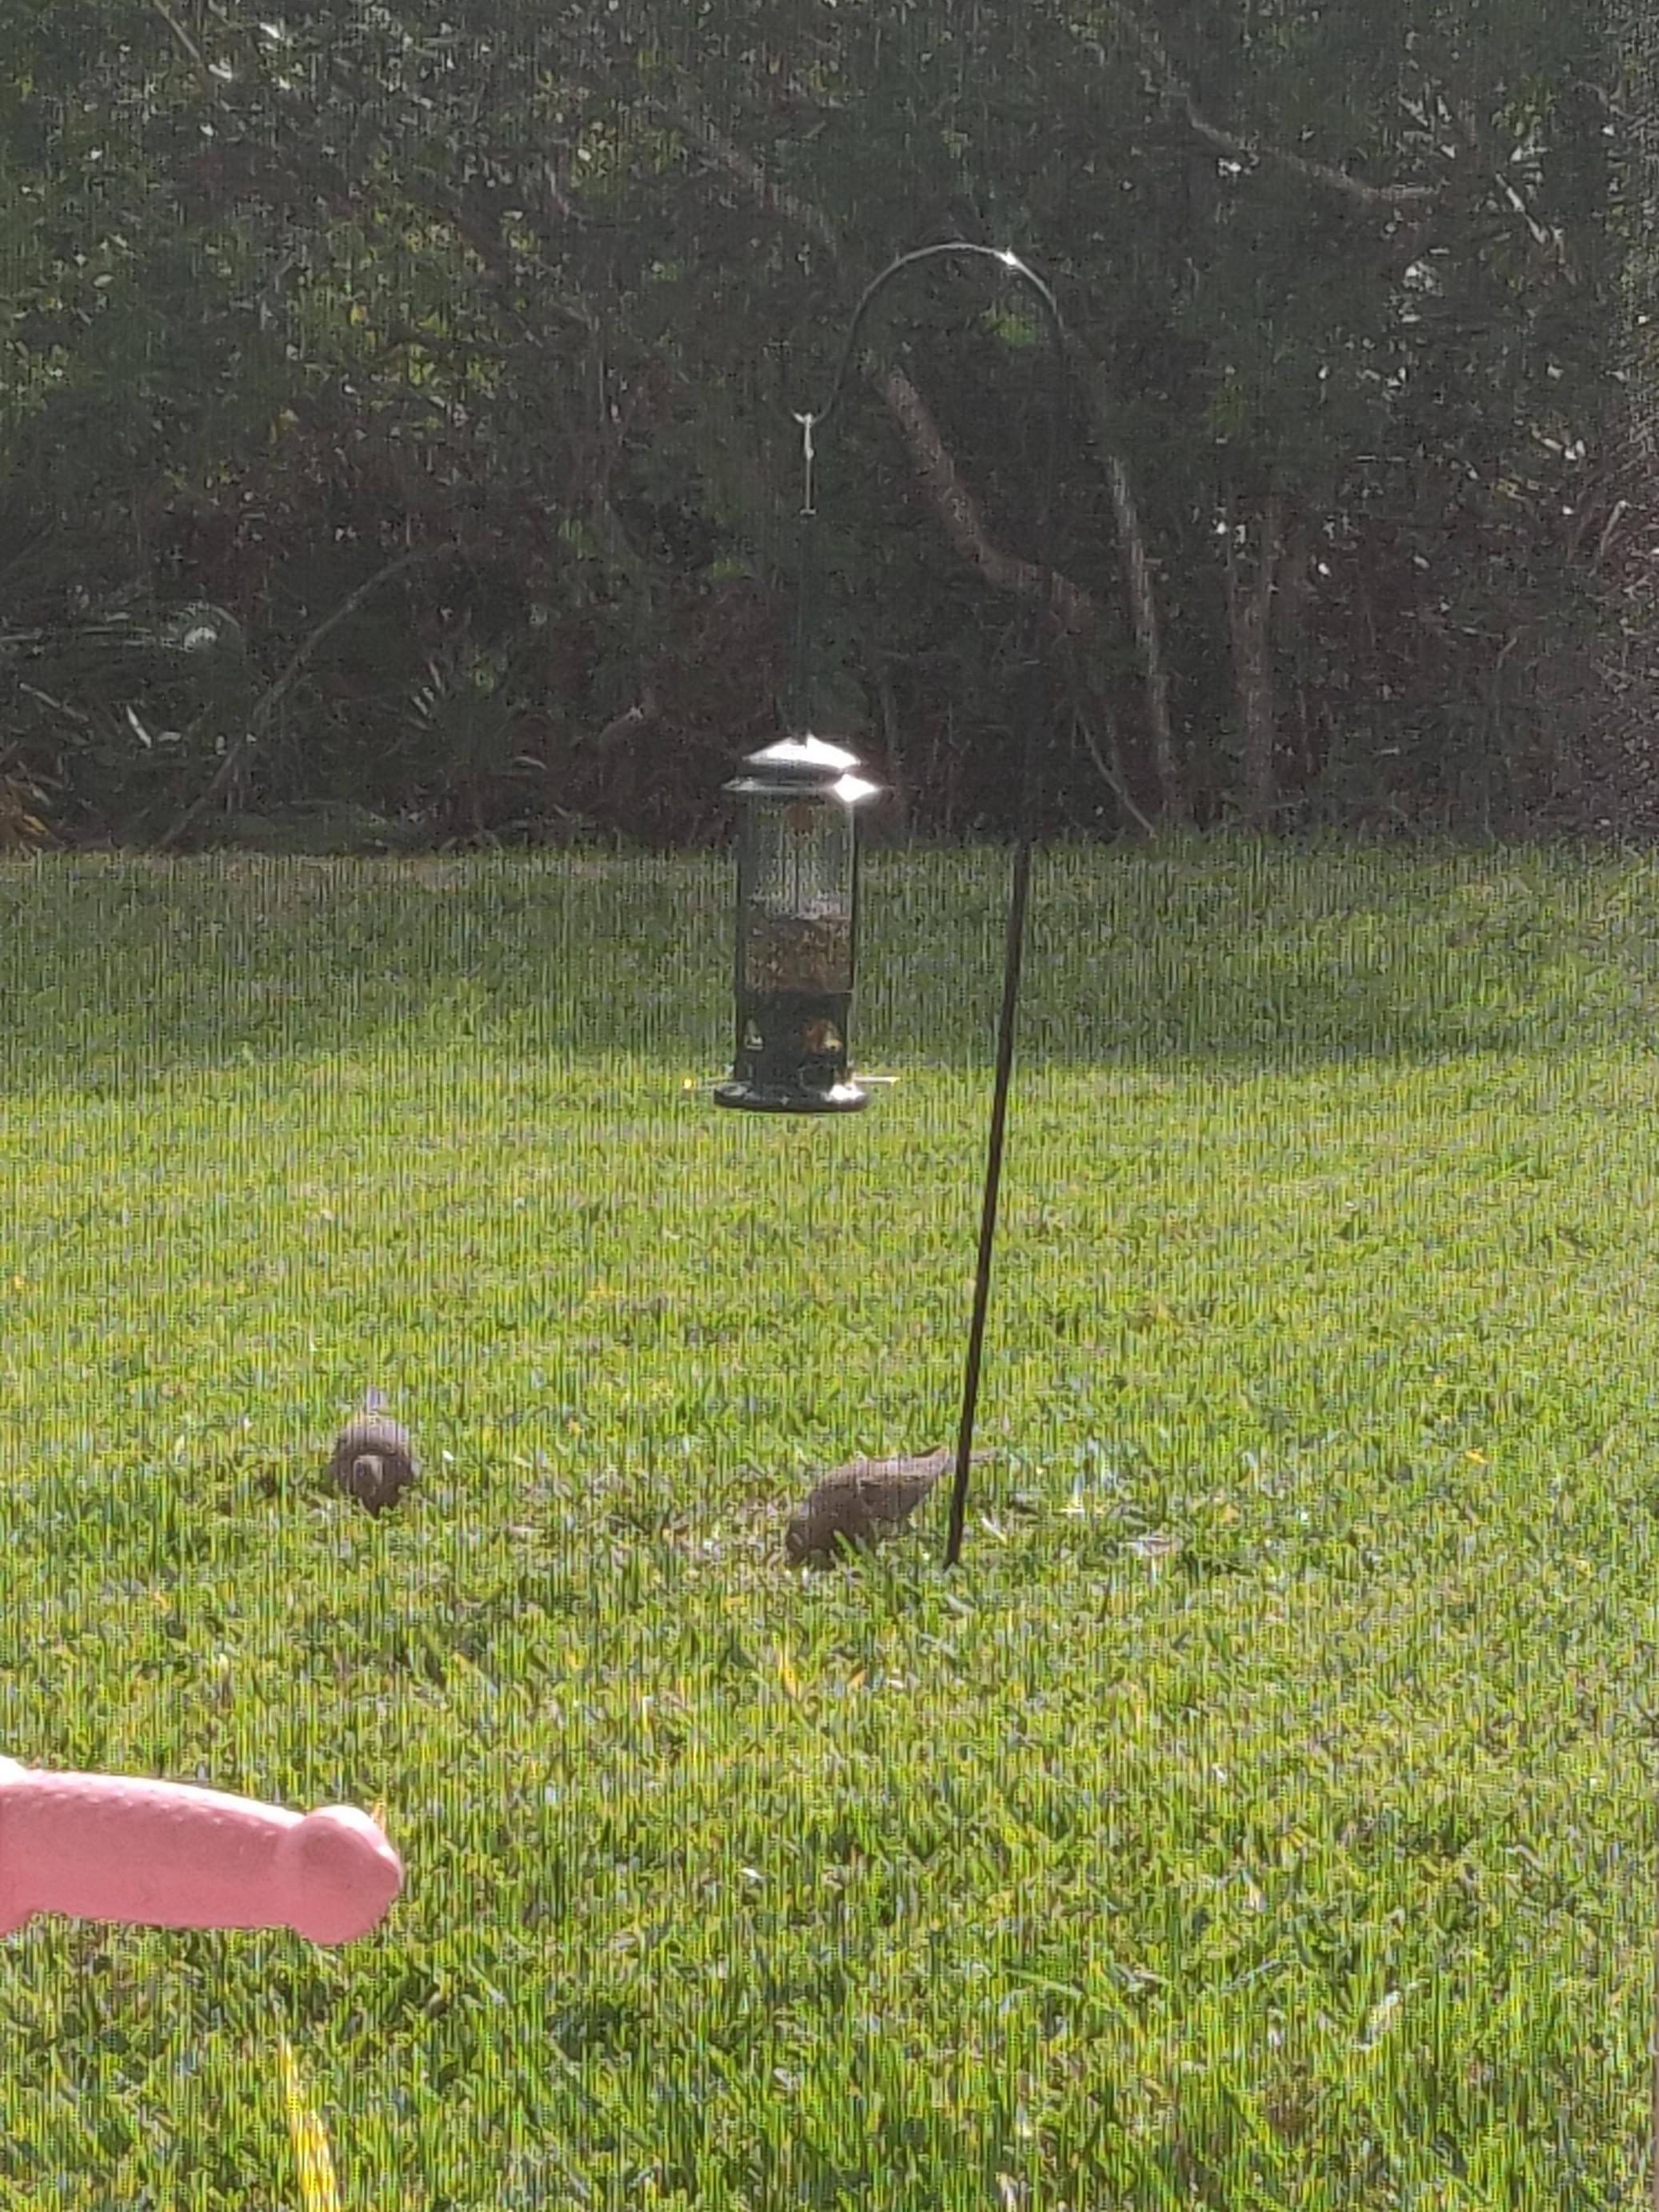 My daughter's tricycle handlebar changed the feeling of this bird feeder picture.